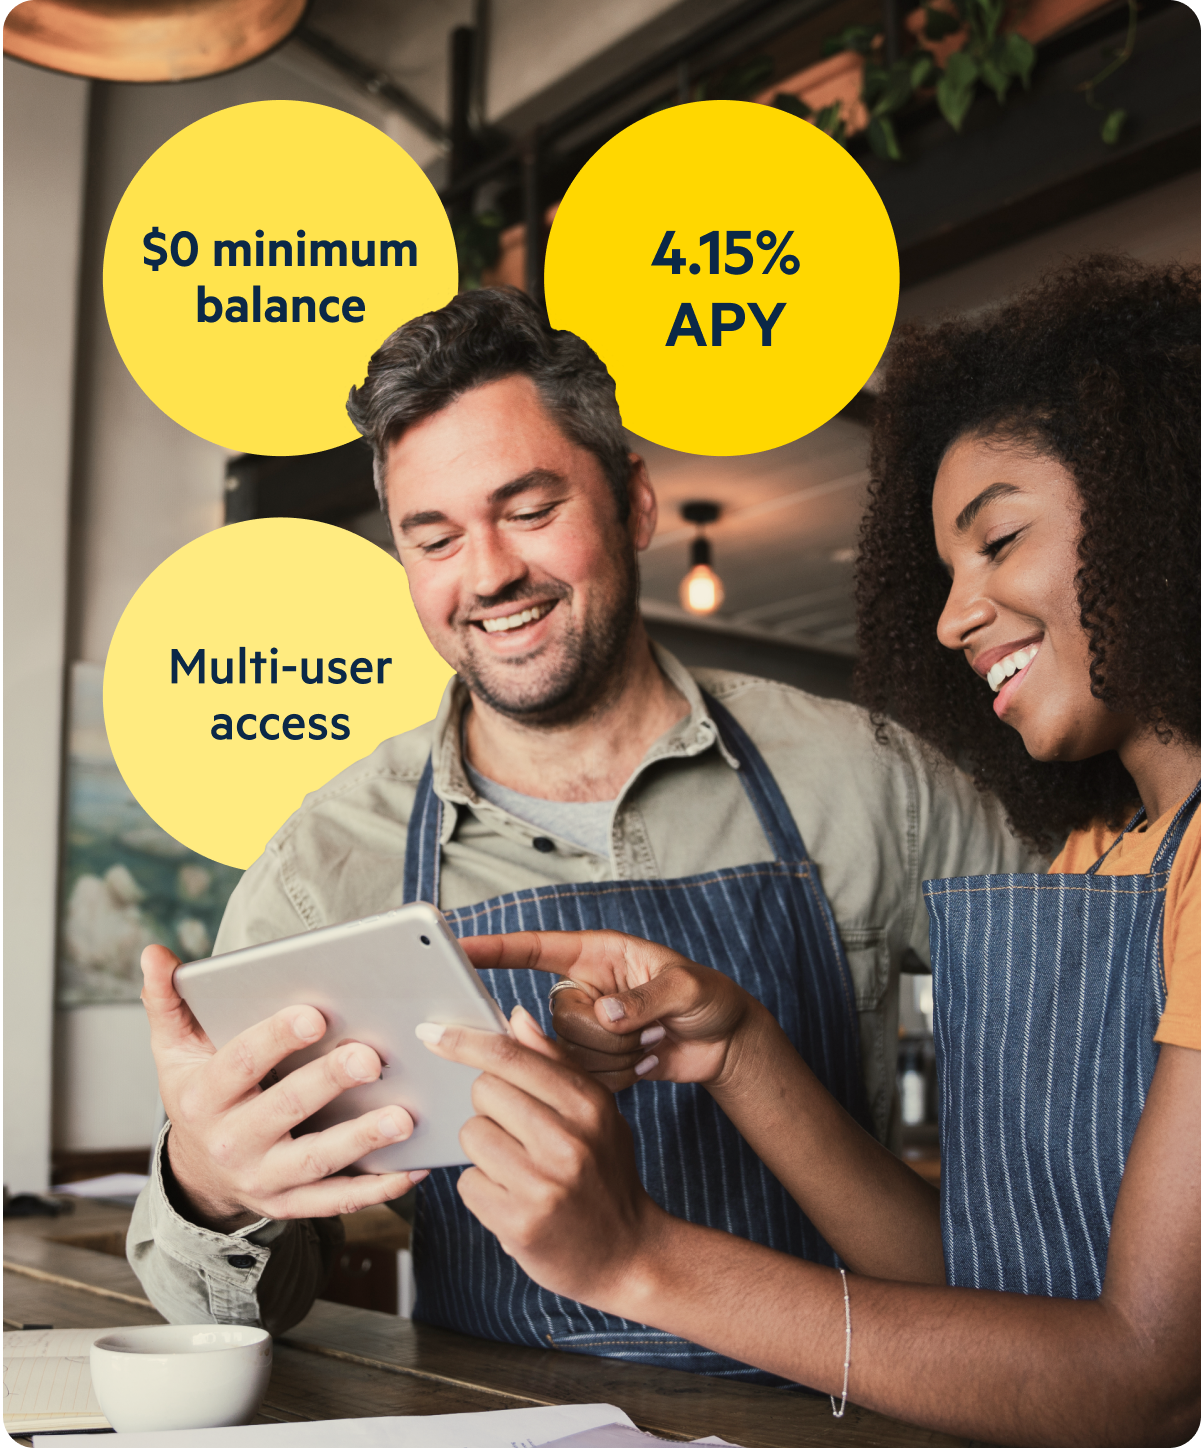 Lili customers shown using the Lili banking platform, with highlighted features displayed in the background ($0 minimum balance, multi-user access, and 4.15% APY)